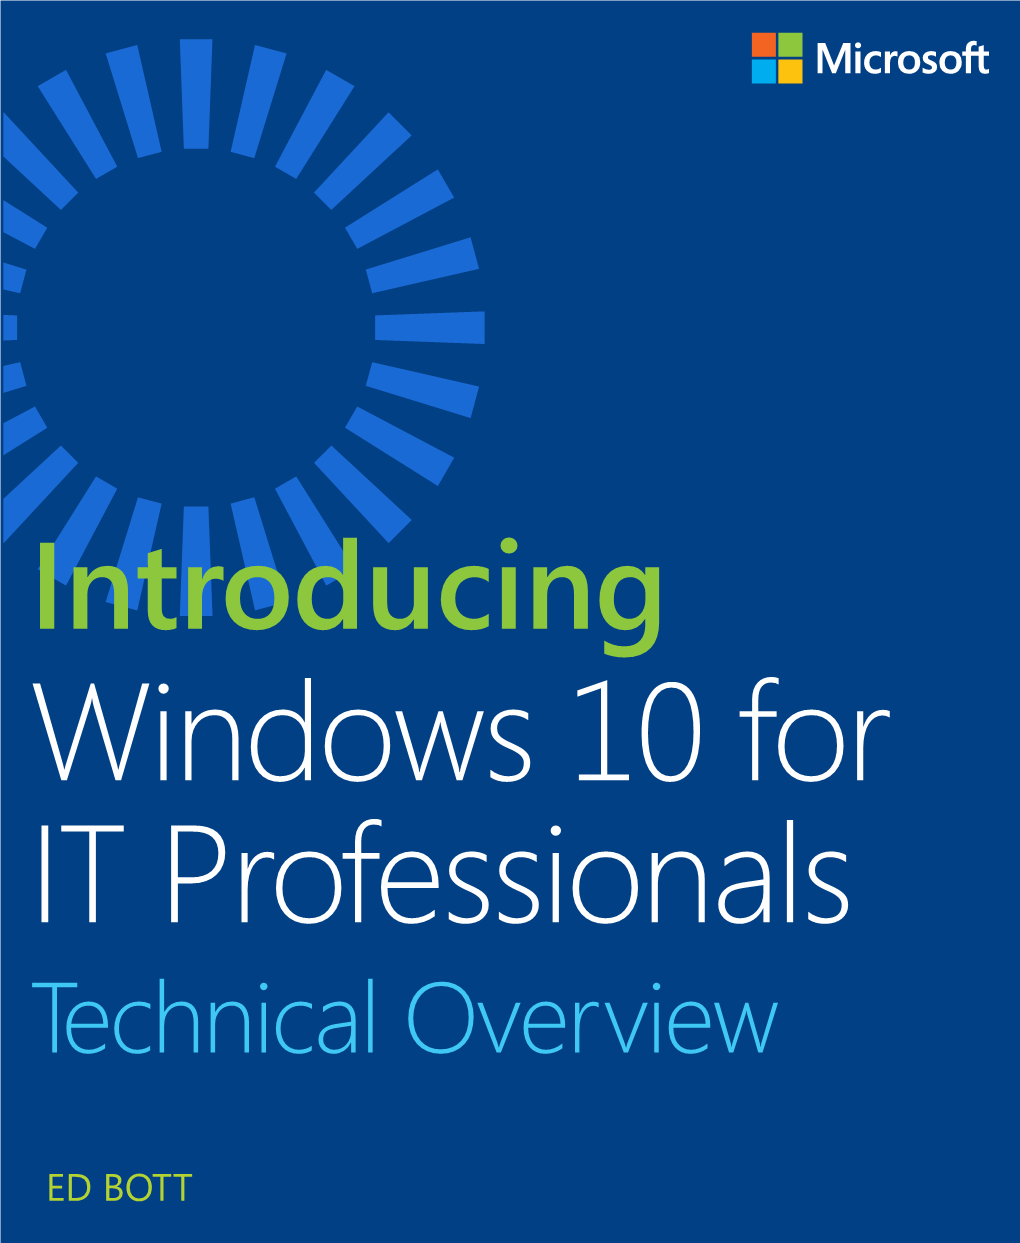 Introducing Windows 10 for IT Professionals Technical Overview